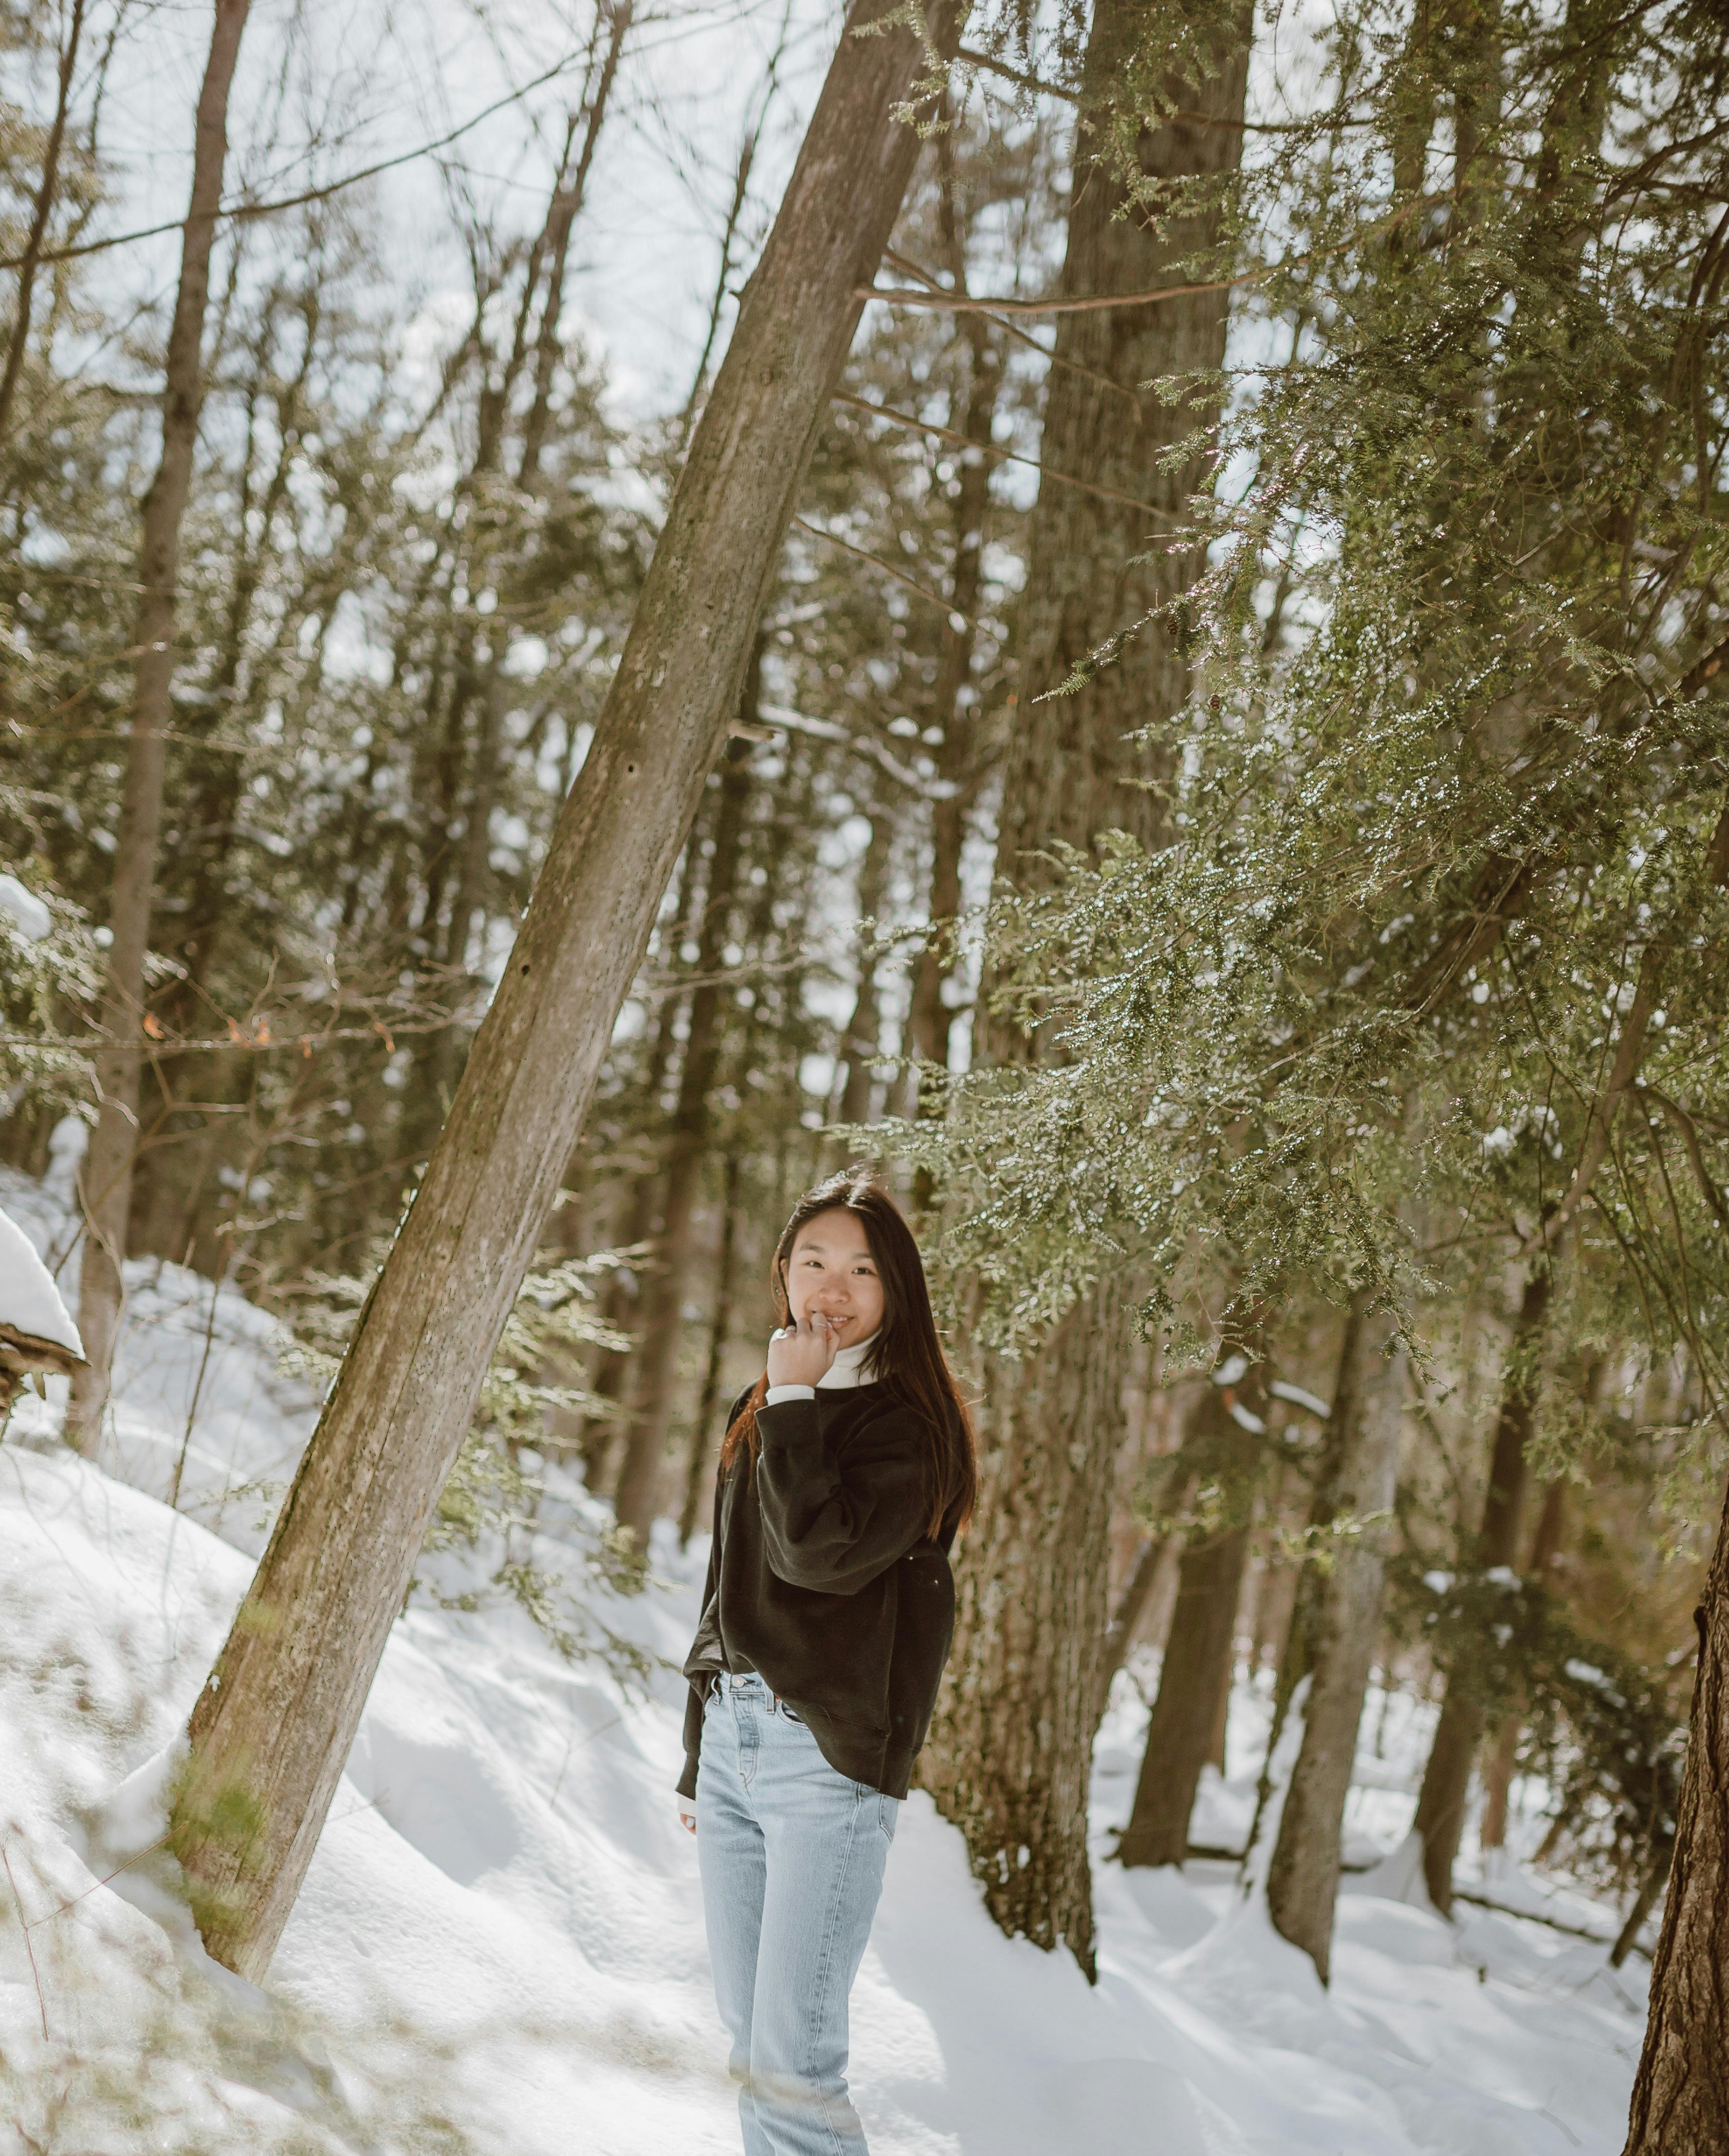 Smiling female walking on road among snowy forest · Free Stock Photo